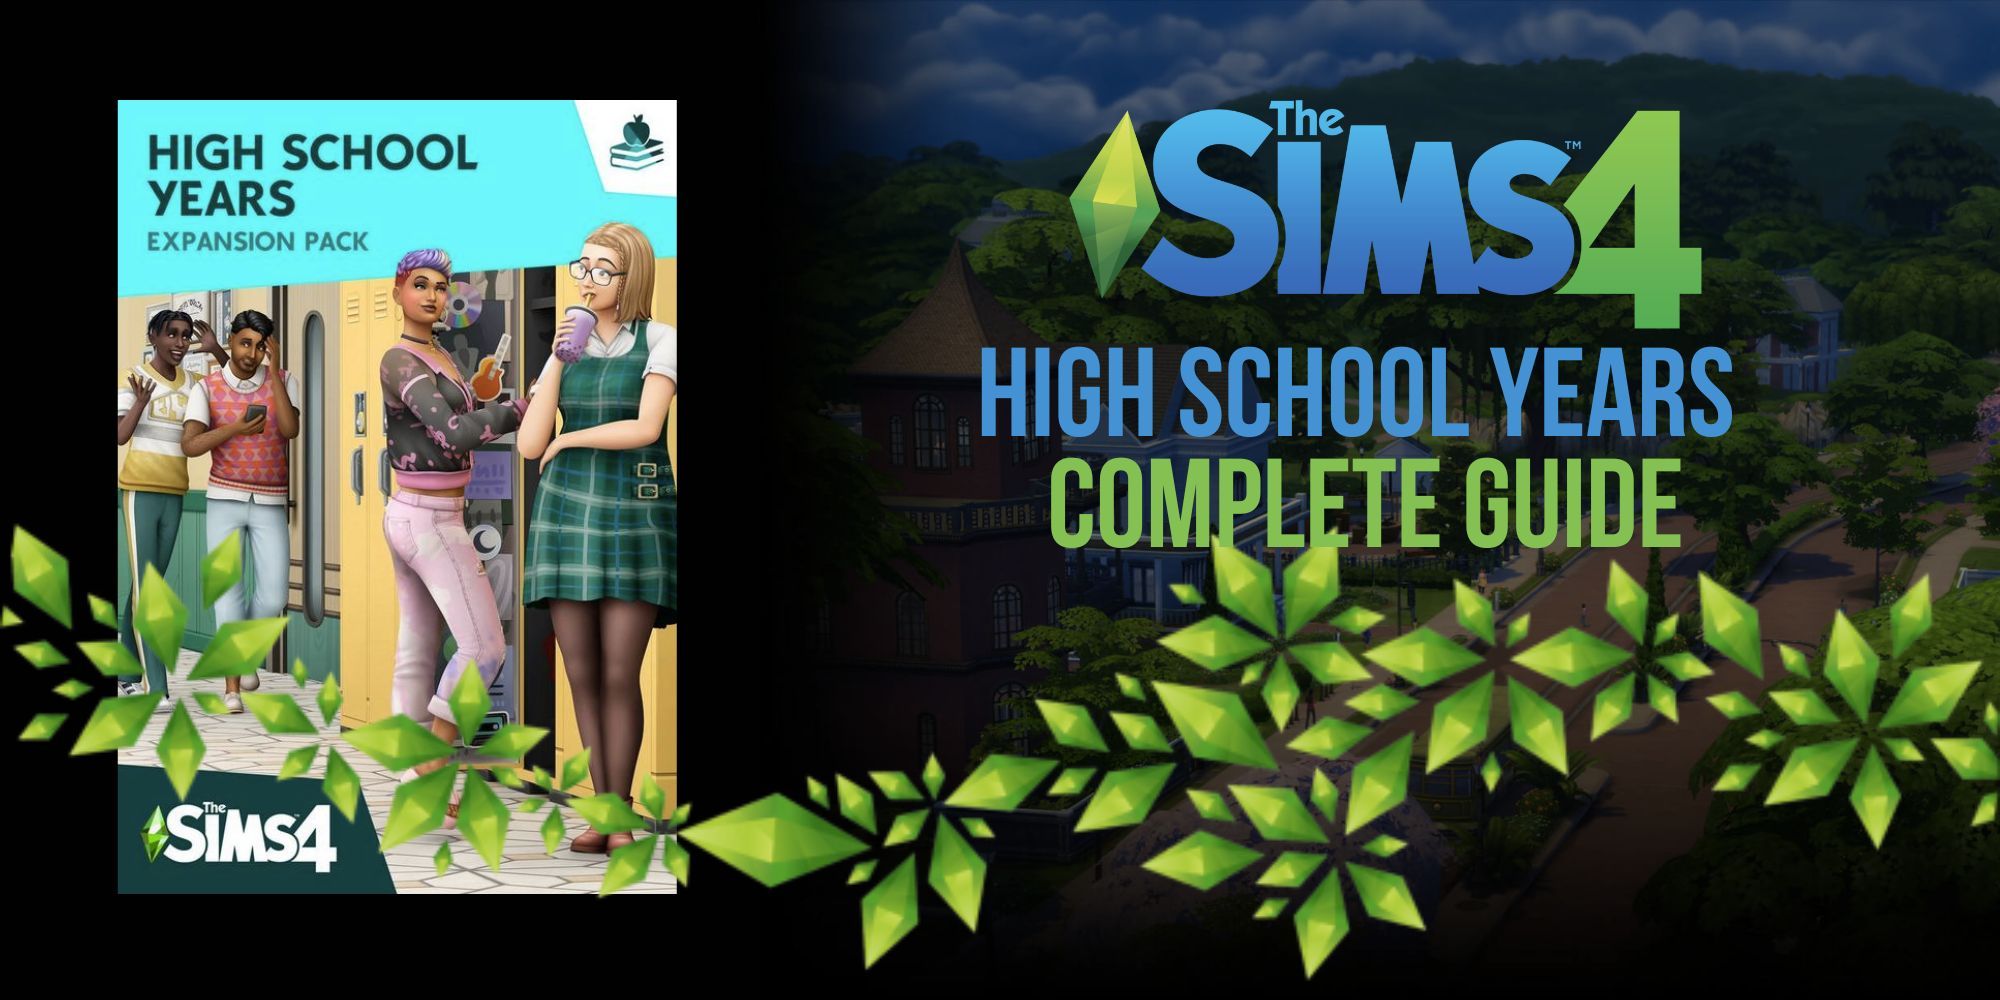 The Sims 4 High School Years Complete Guide